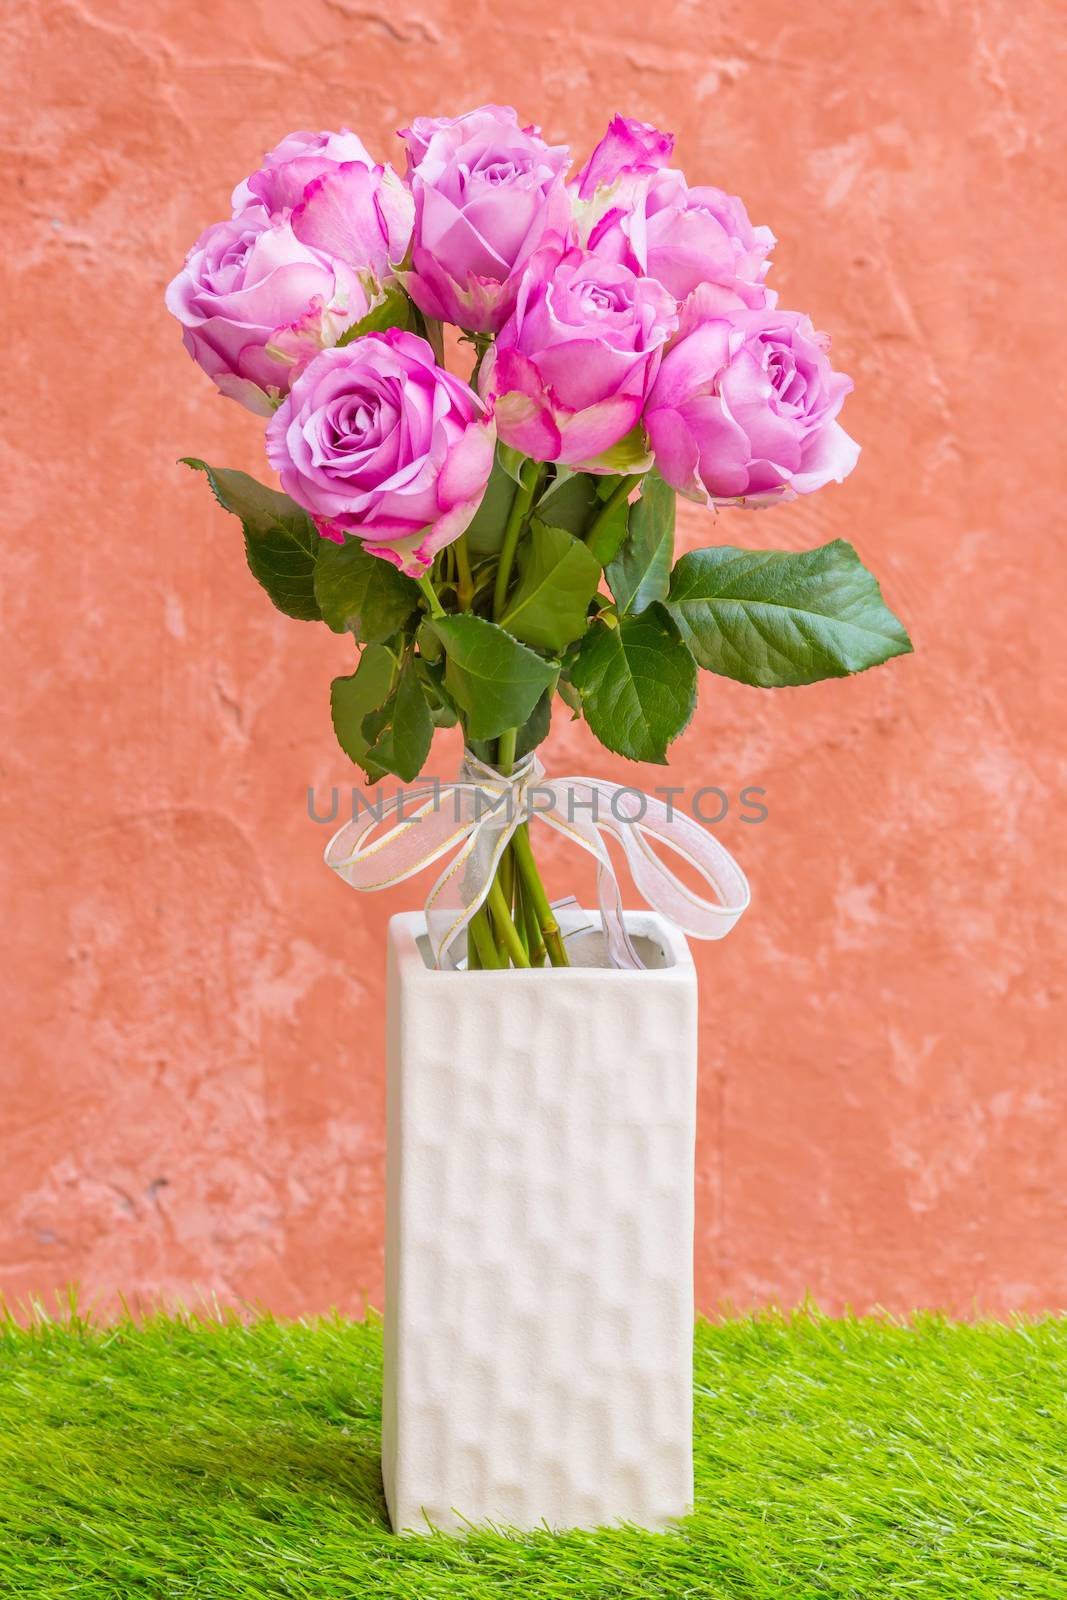 Violet rose in vase with white bow tie